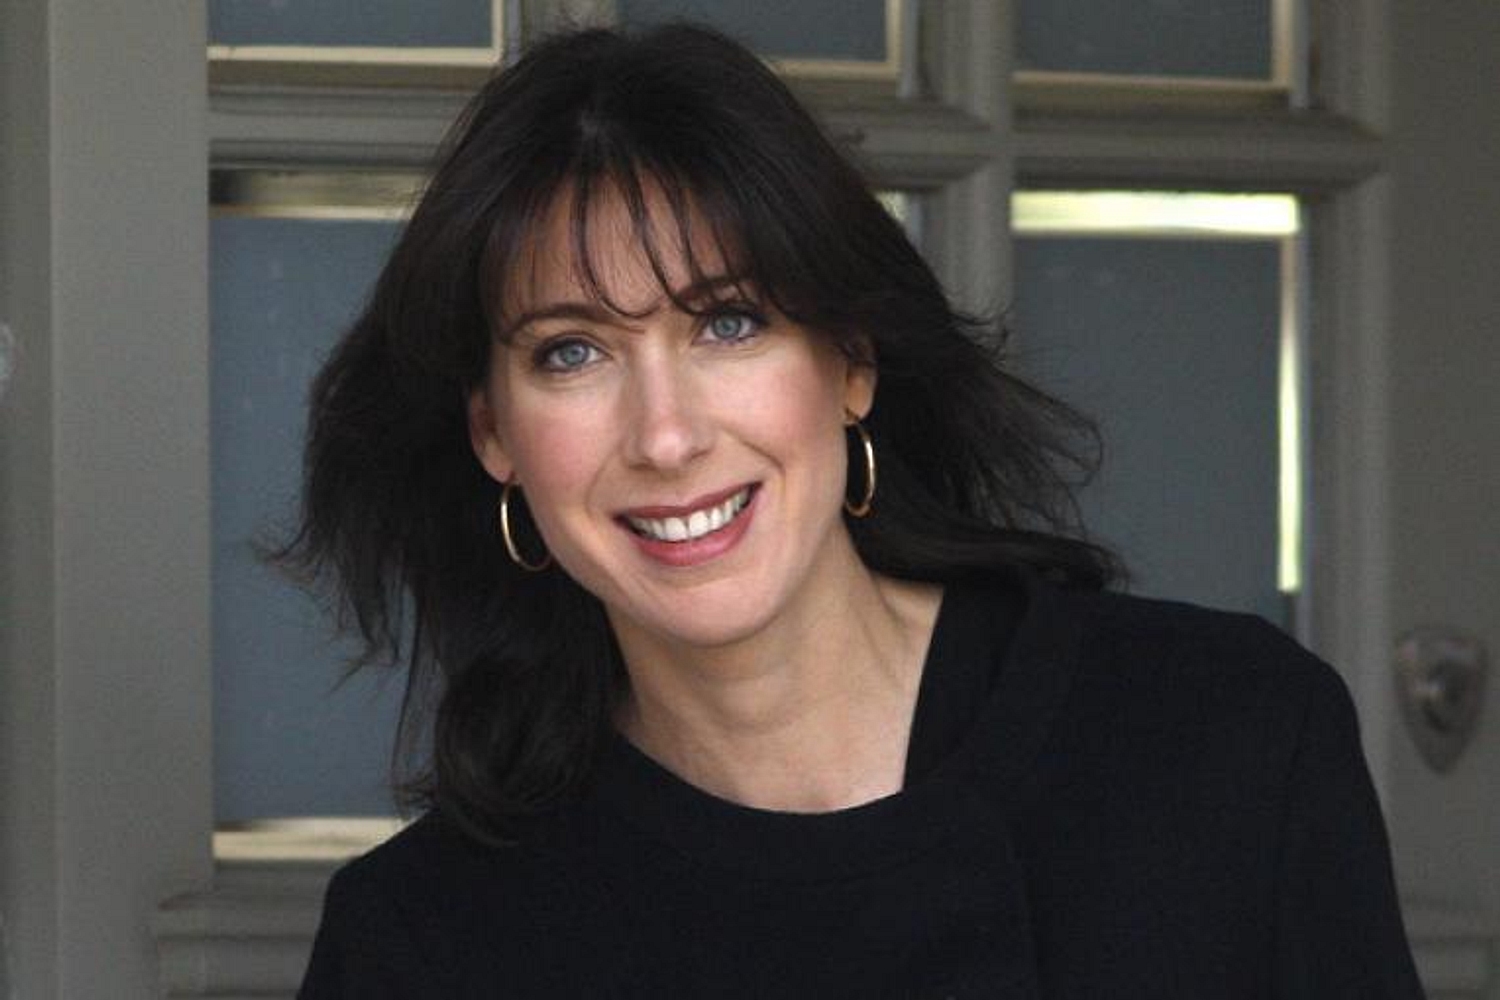 Samantha Cameron’s a fan of Poliça and listens to Radio 6 “all day long”